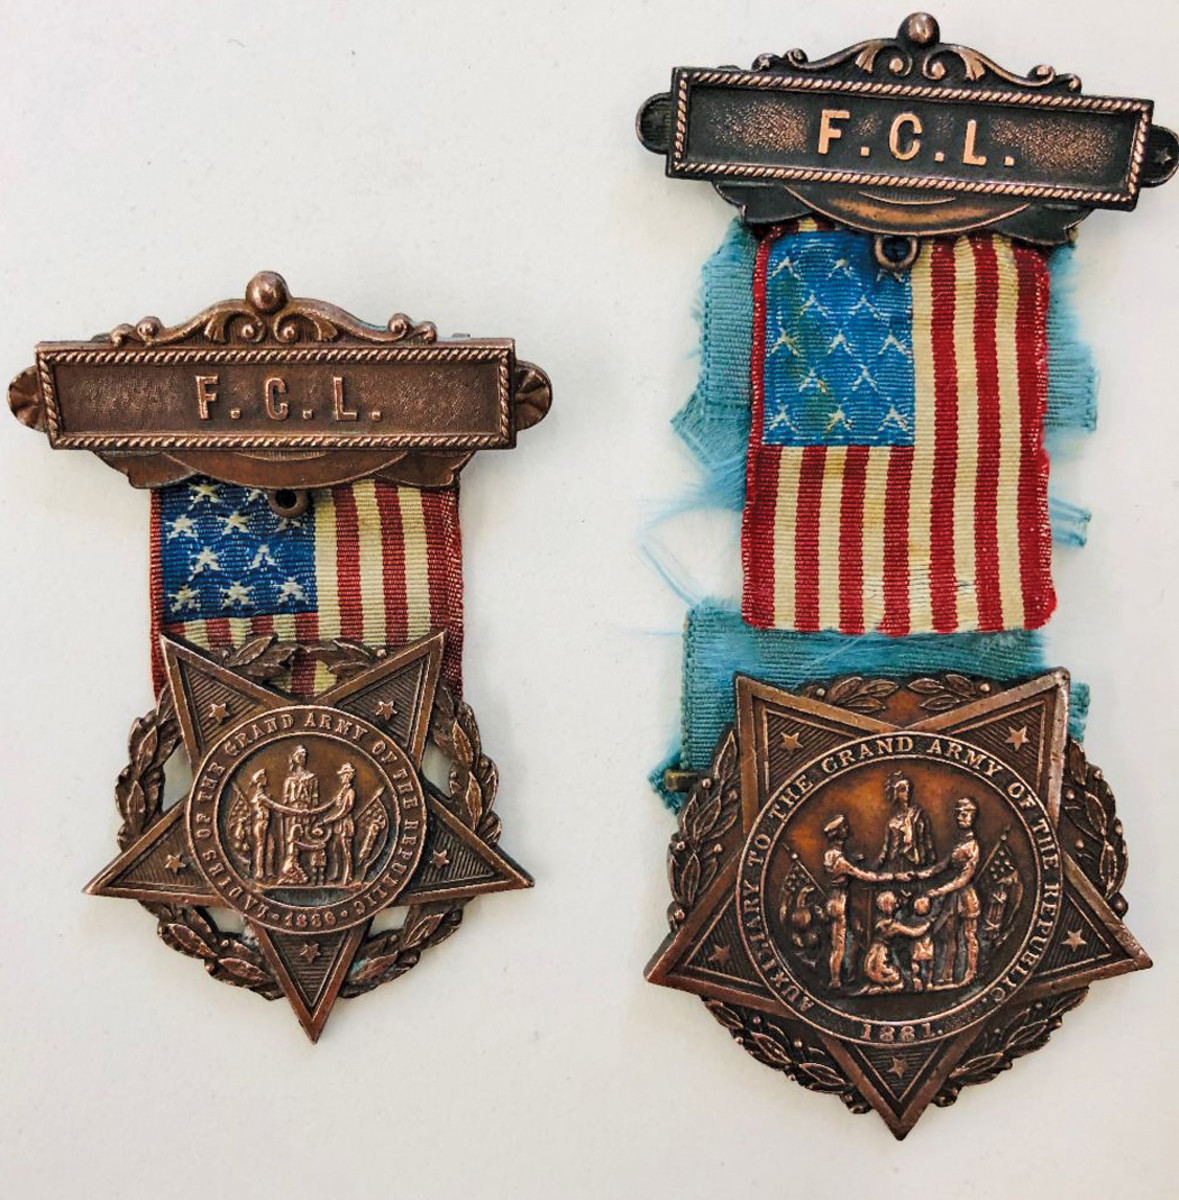 Two variations of the Ladies of the Grand Army of the Republic membership medal.